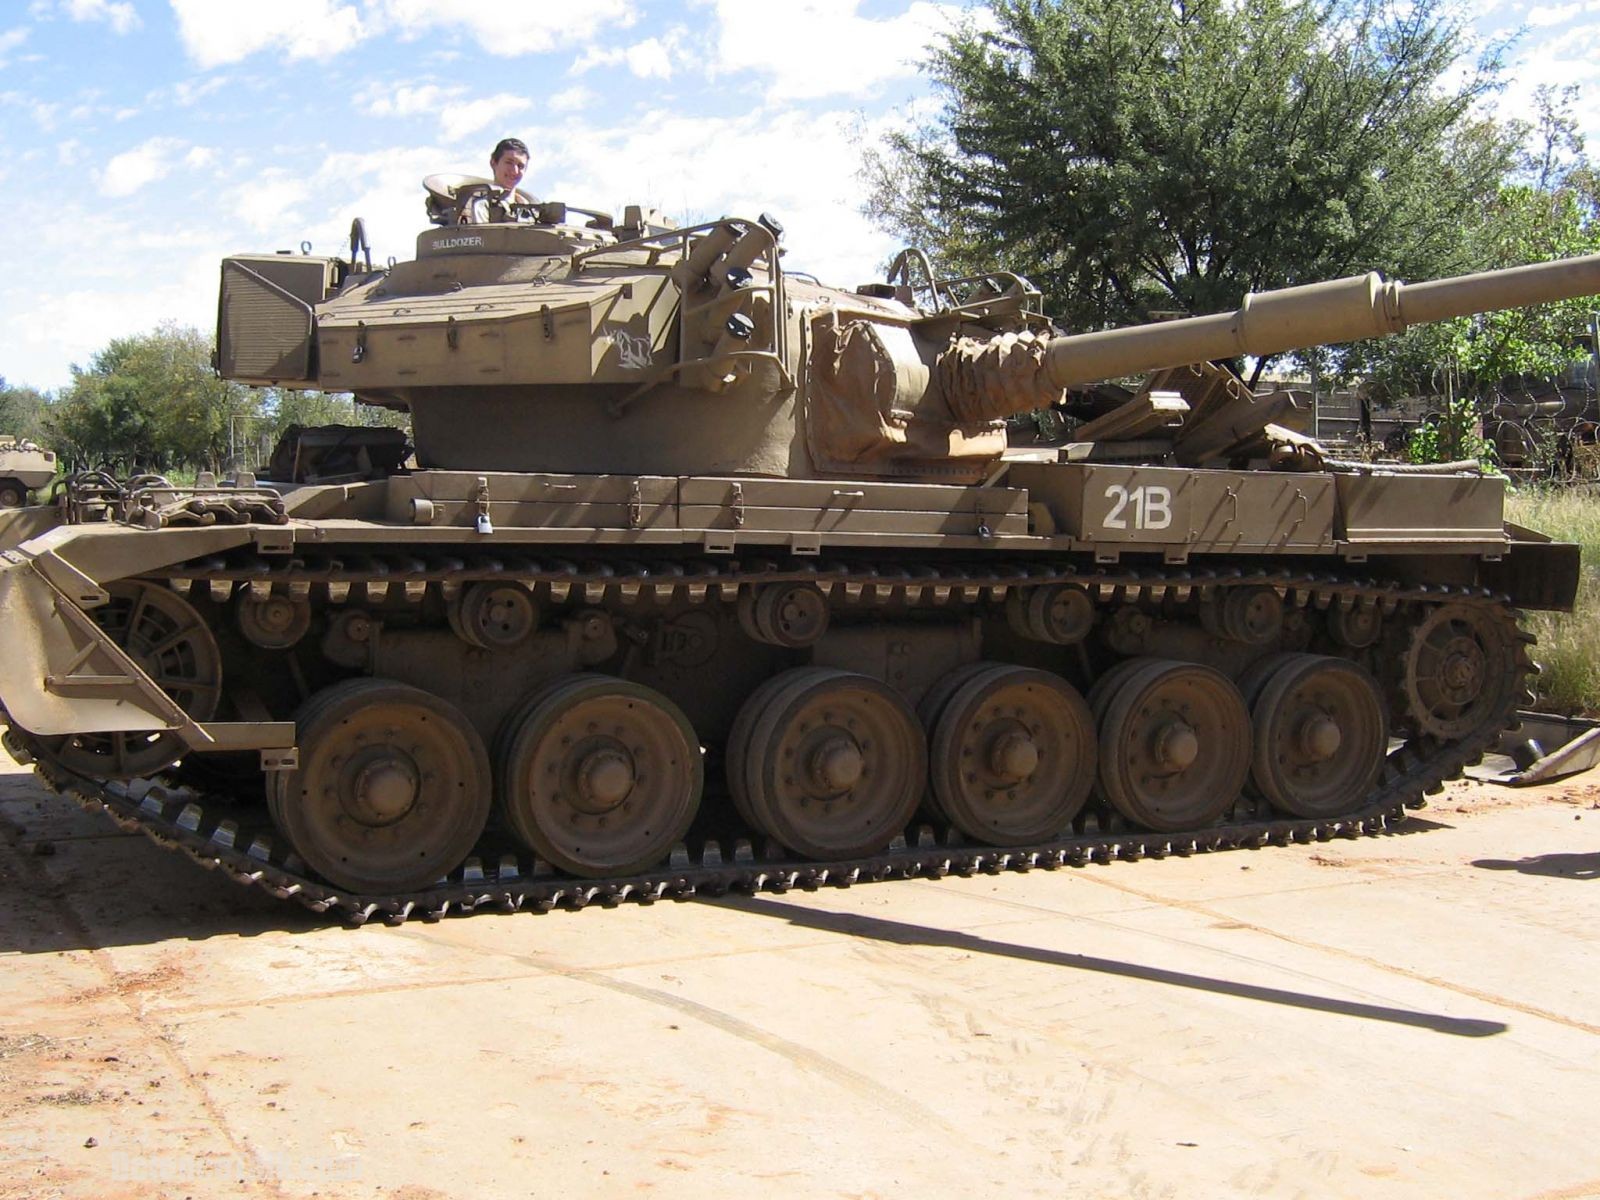 Olifant MK1 - South African Army